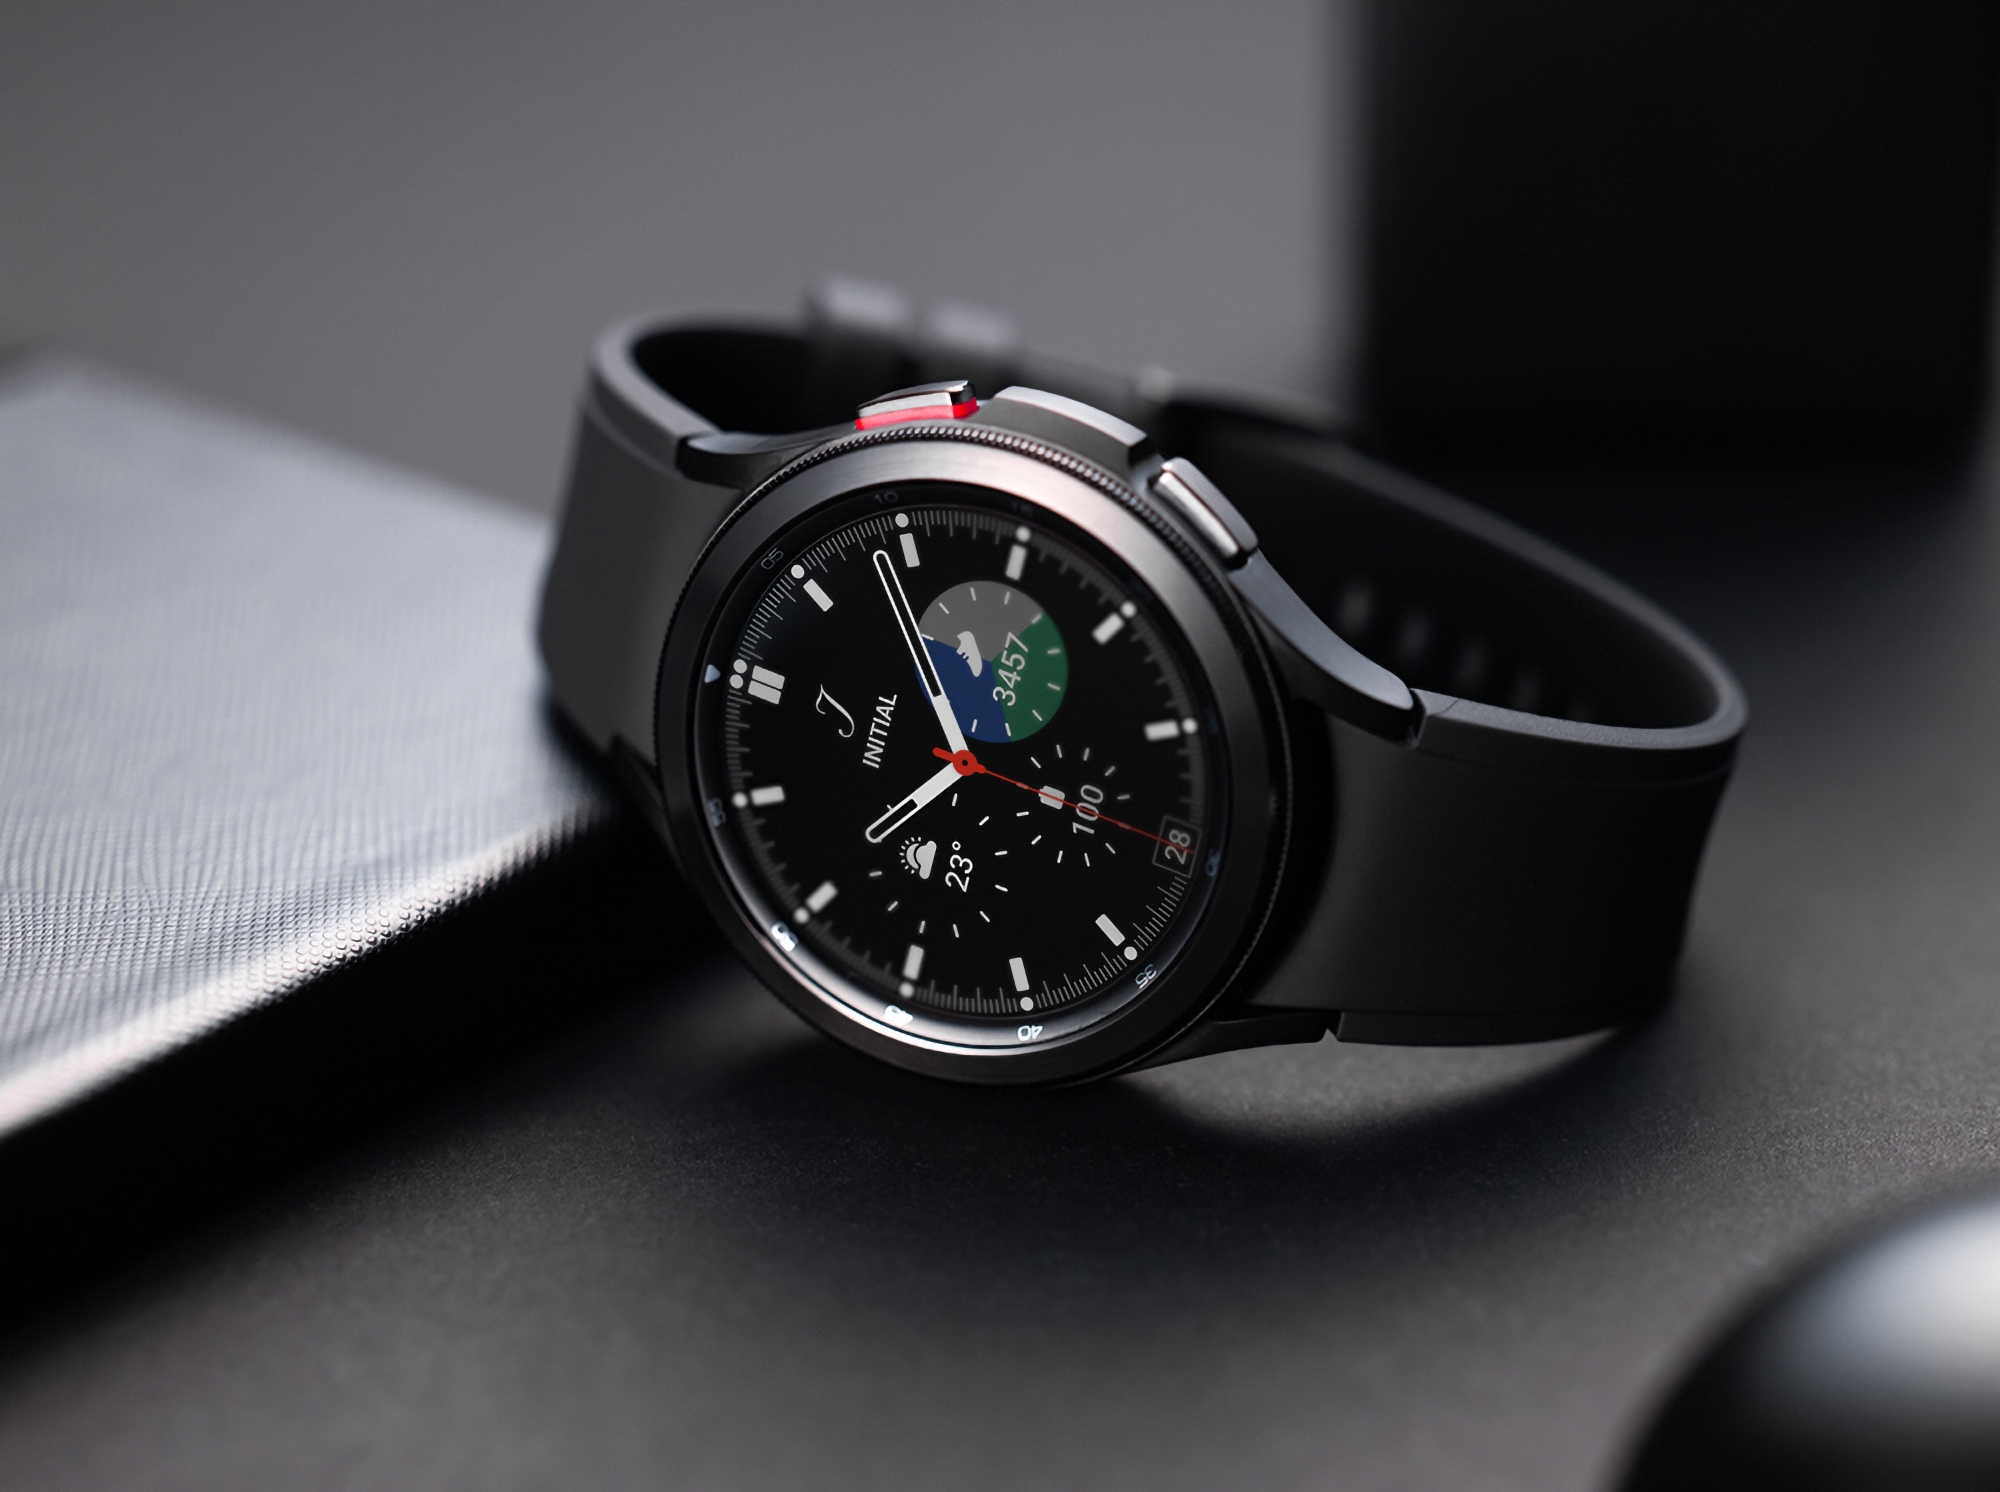 Samsung has released a new software version for the Galaxy Watch 4 and Galaxy Watch 4 Classic